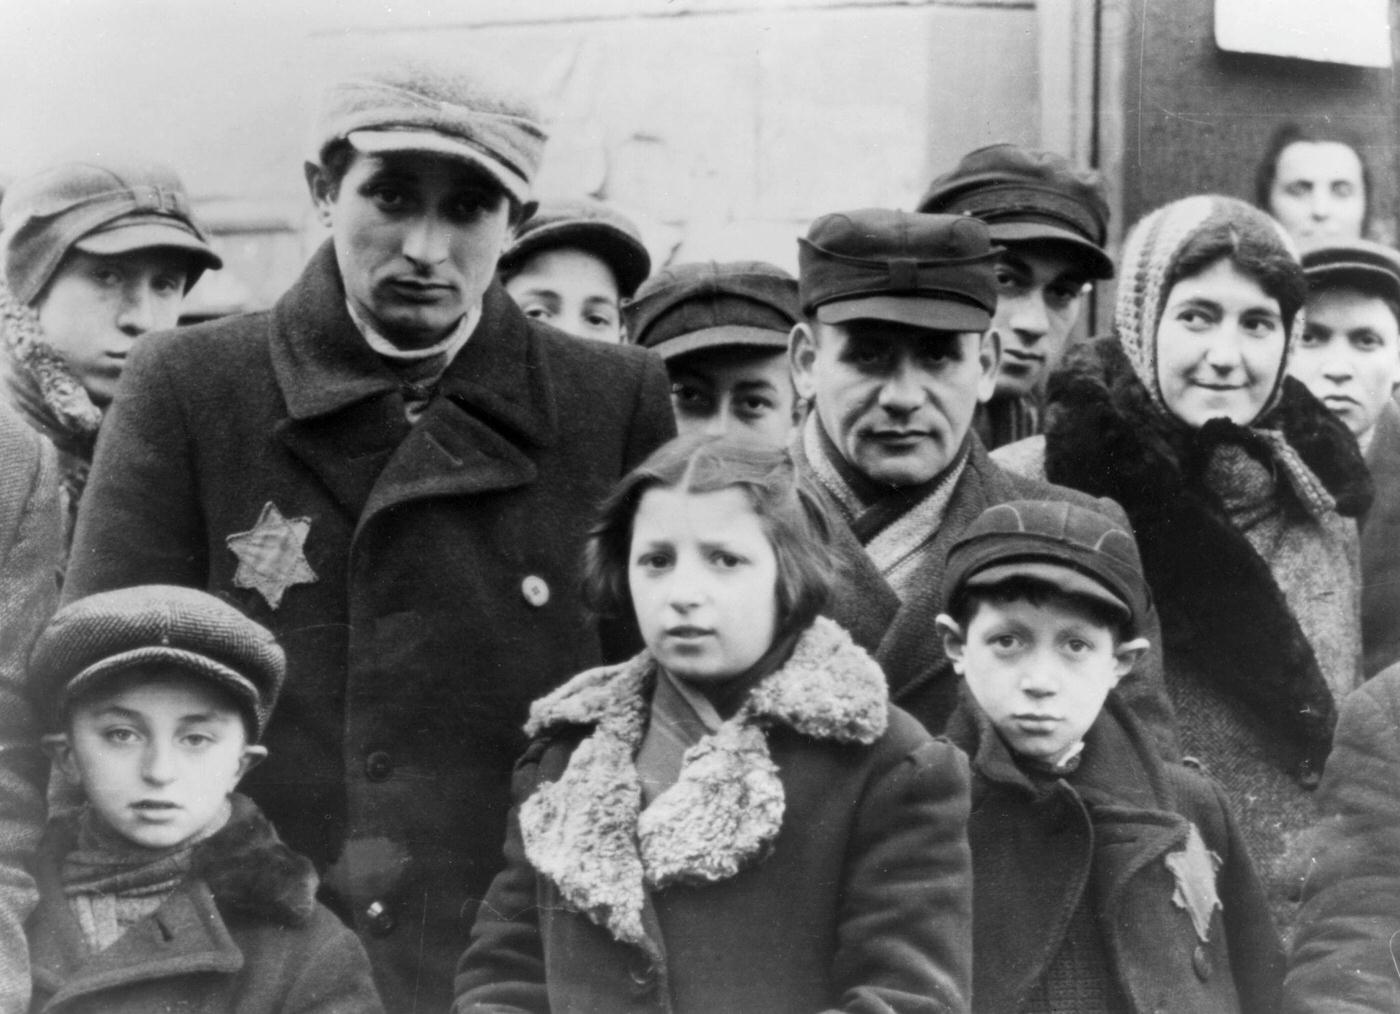 In World War II, the Jews in Lodz Ghetto, Poland were made to wear badges with the Star of David on them. The Nazis had confined them to cramped ghettos and deported thousands to death camps.